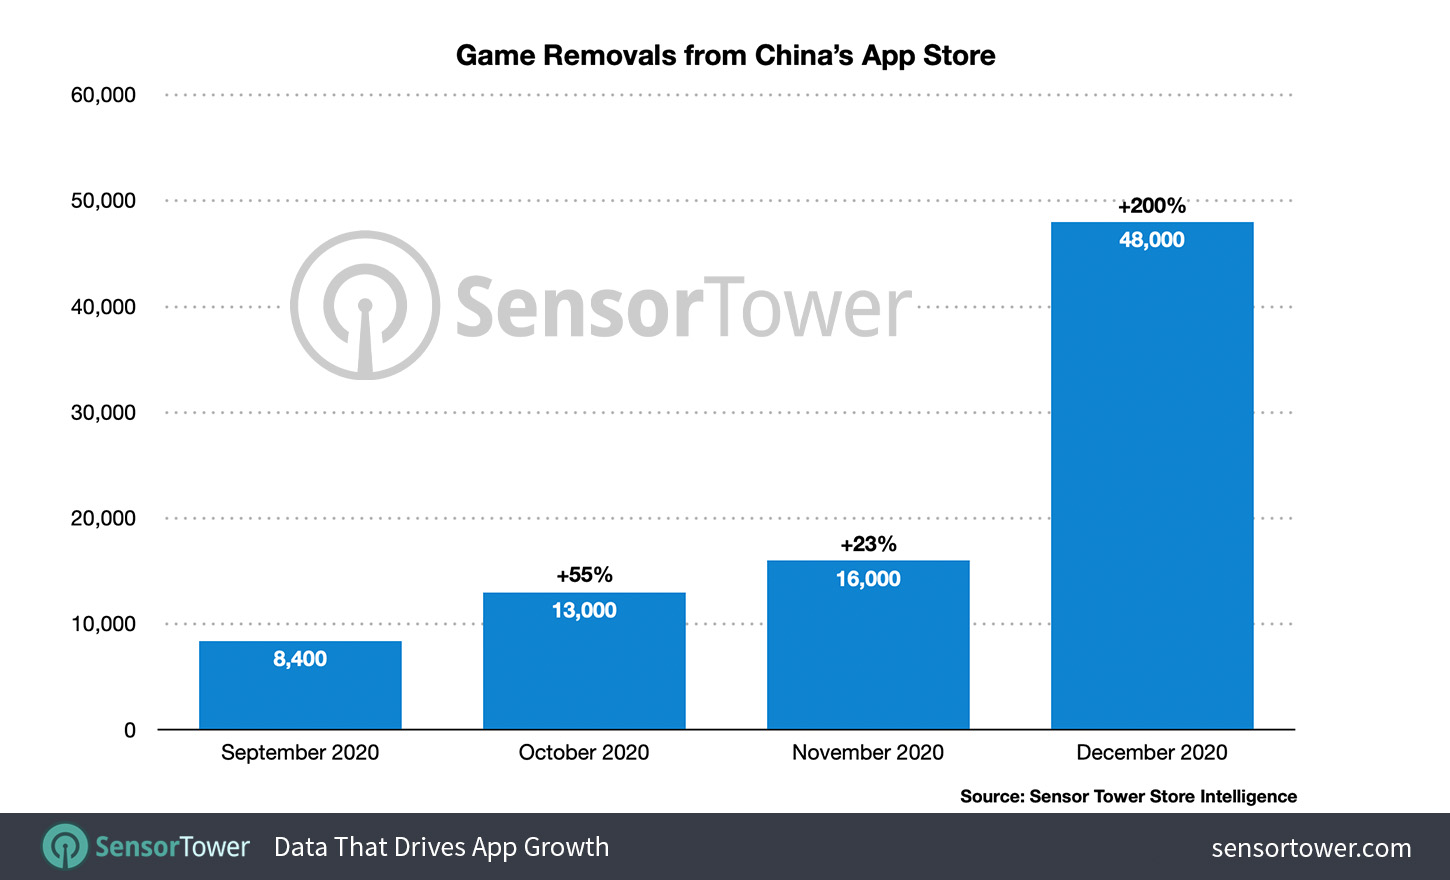 China App Store Game Removals